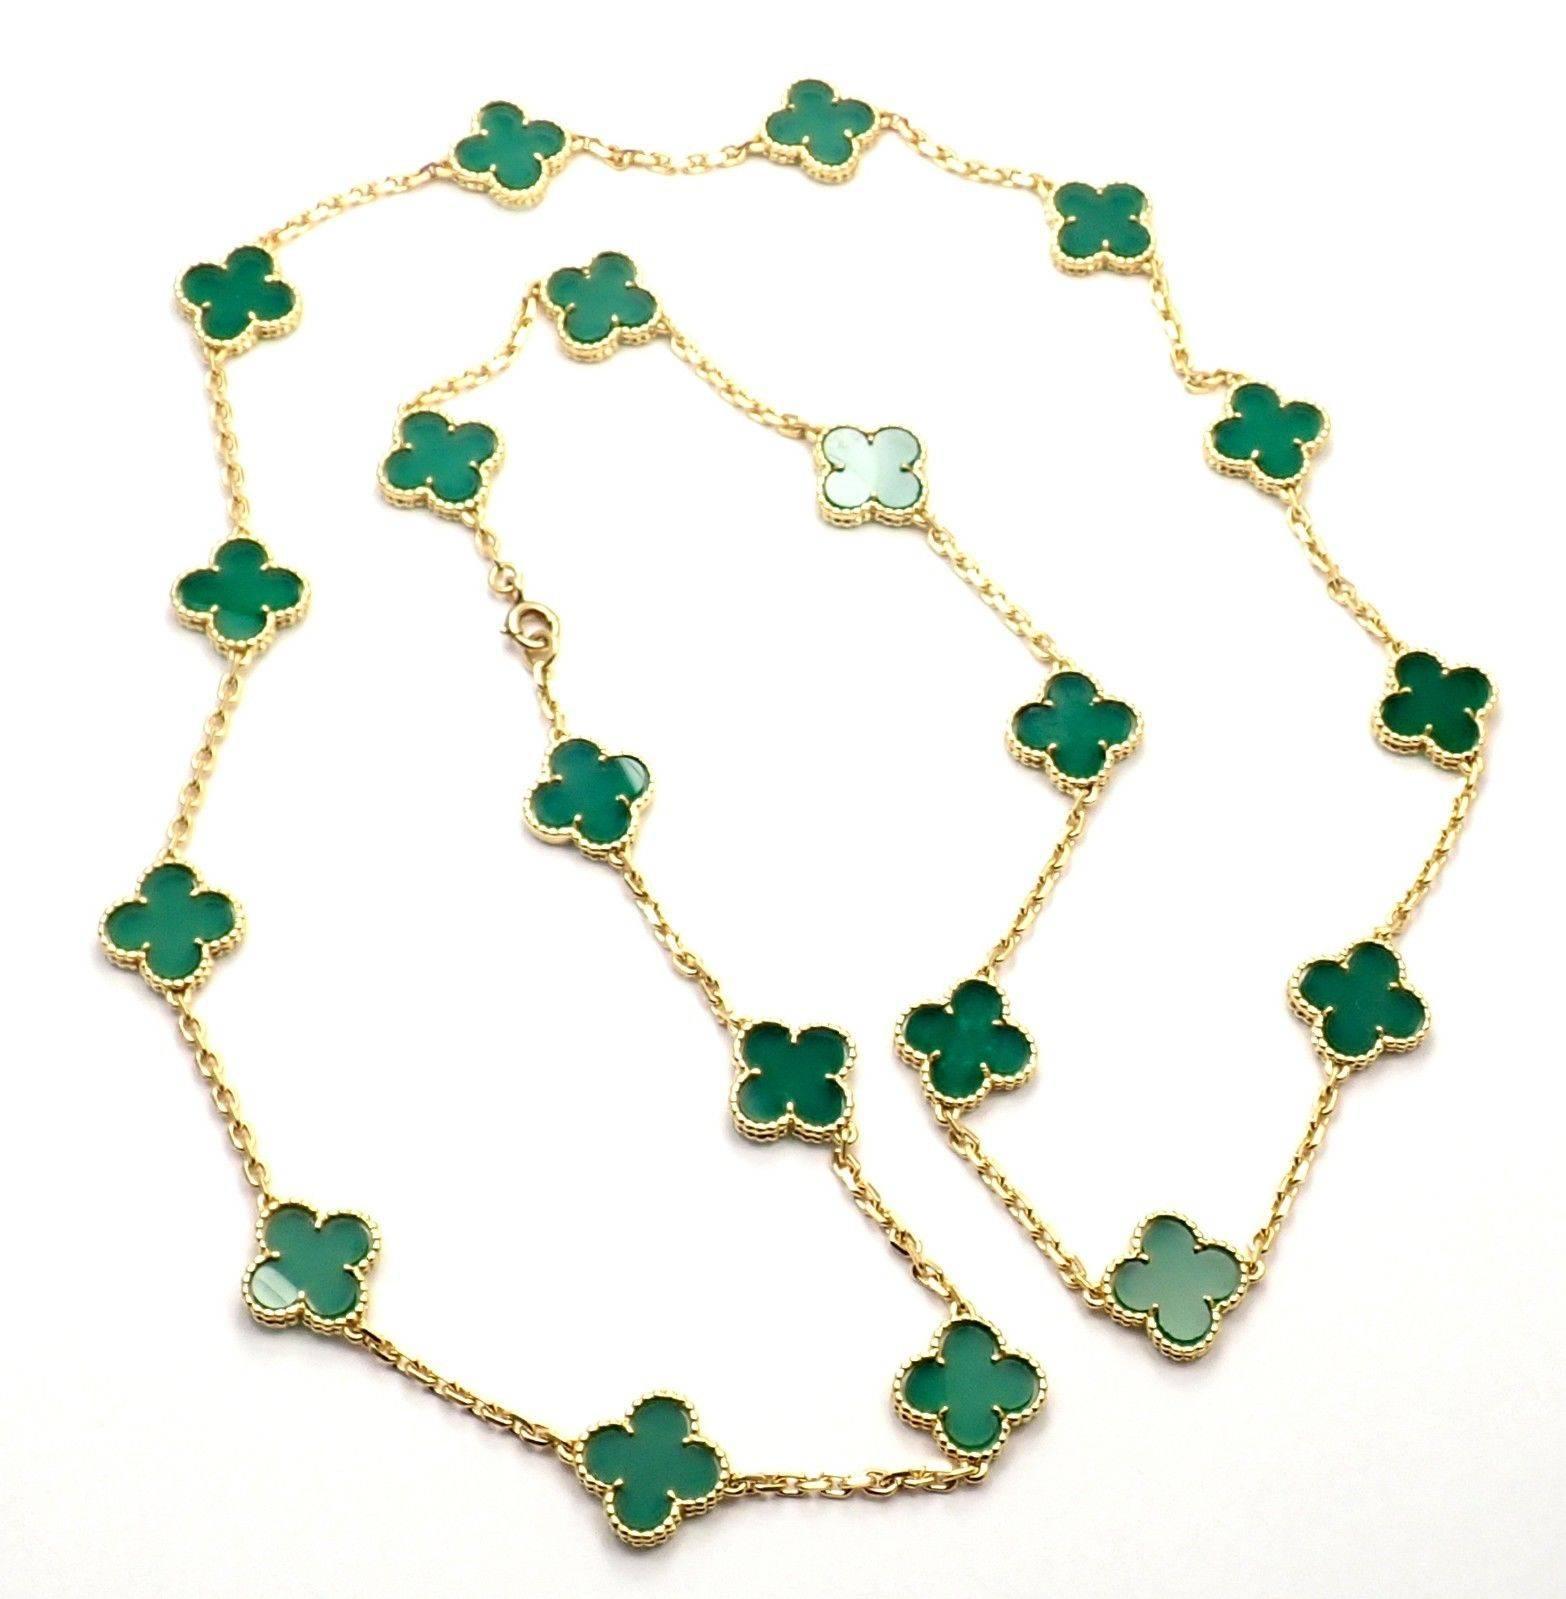 18k Yellow Gold Vintage 20 Alhambra Chrysoprase Green Chalcedony Necklace by 
Van Cleef & Arpels.
With 20 motifs of chrysoprase green chalcedony alhambra stones 15mm each
*** This is a rare, very collectible, antique Van Cleef & Arpels Chrysoprase